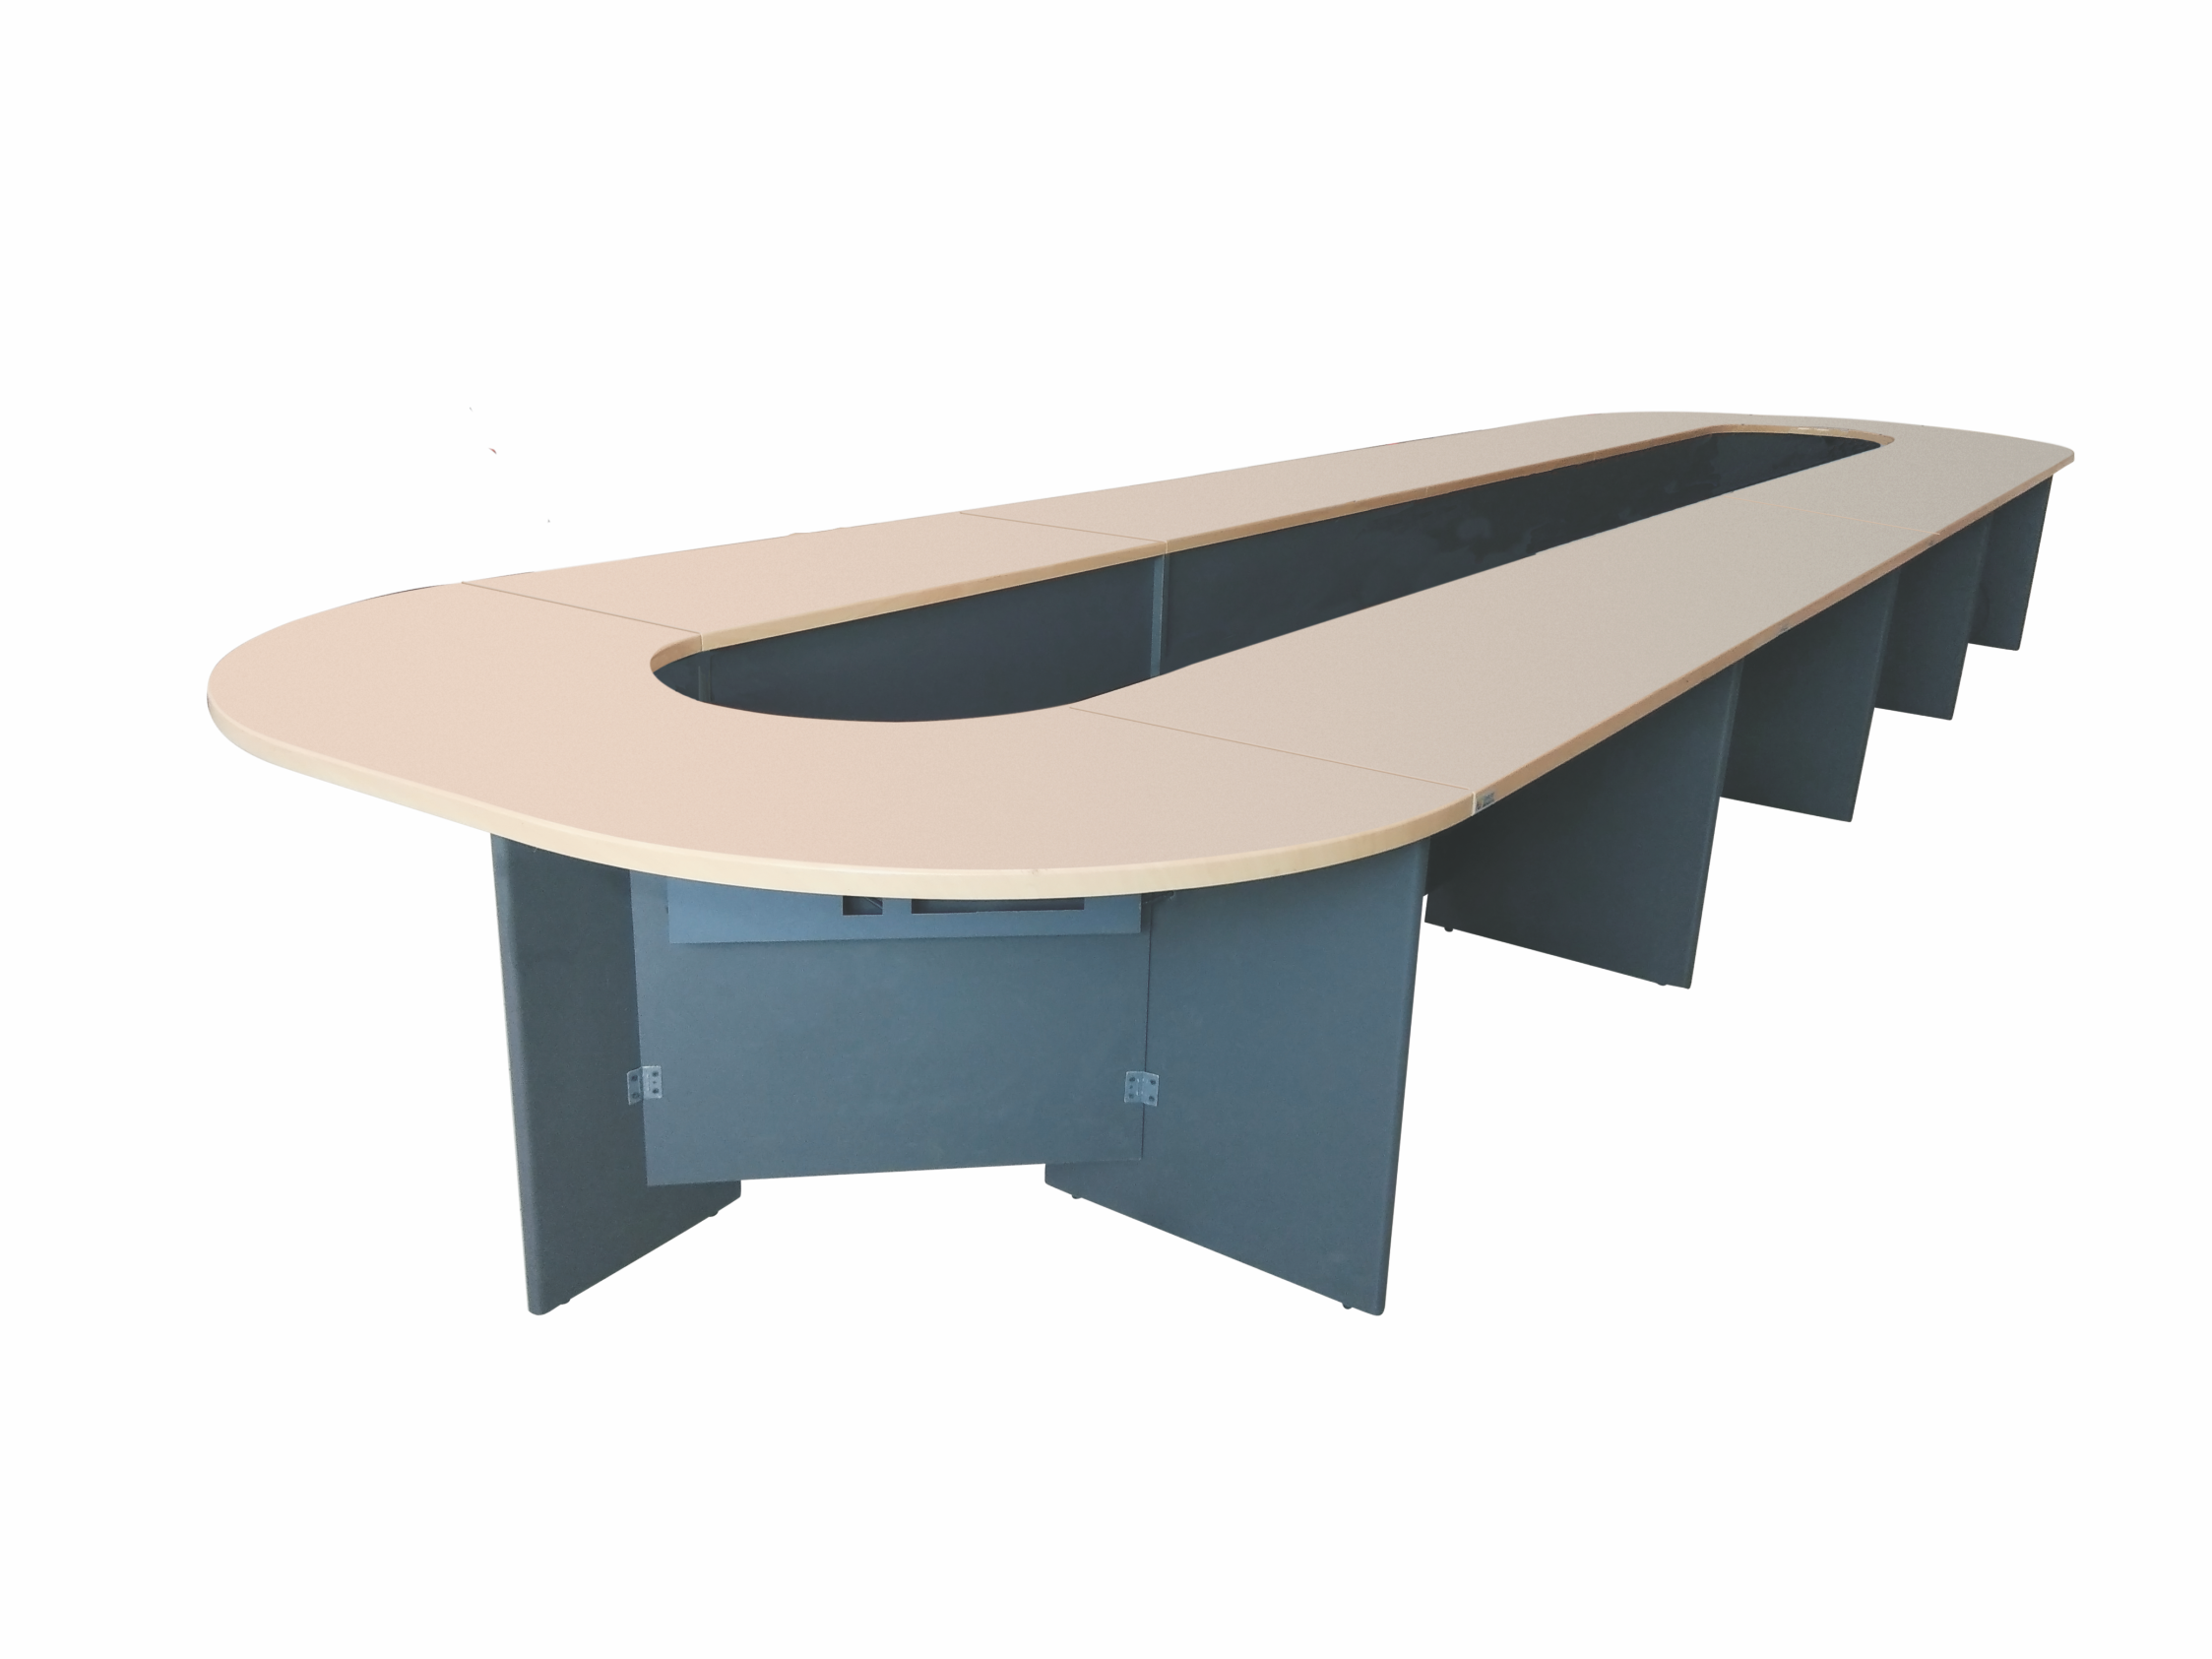 CONFERENCE 13 - U Shape Conference Table